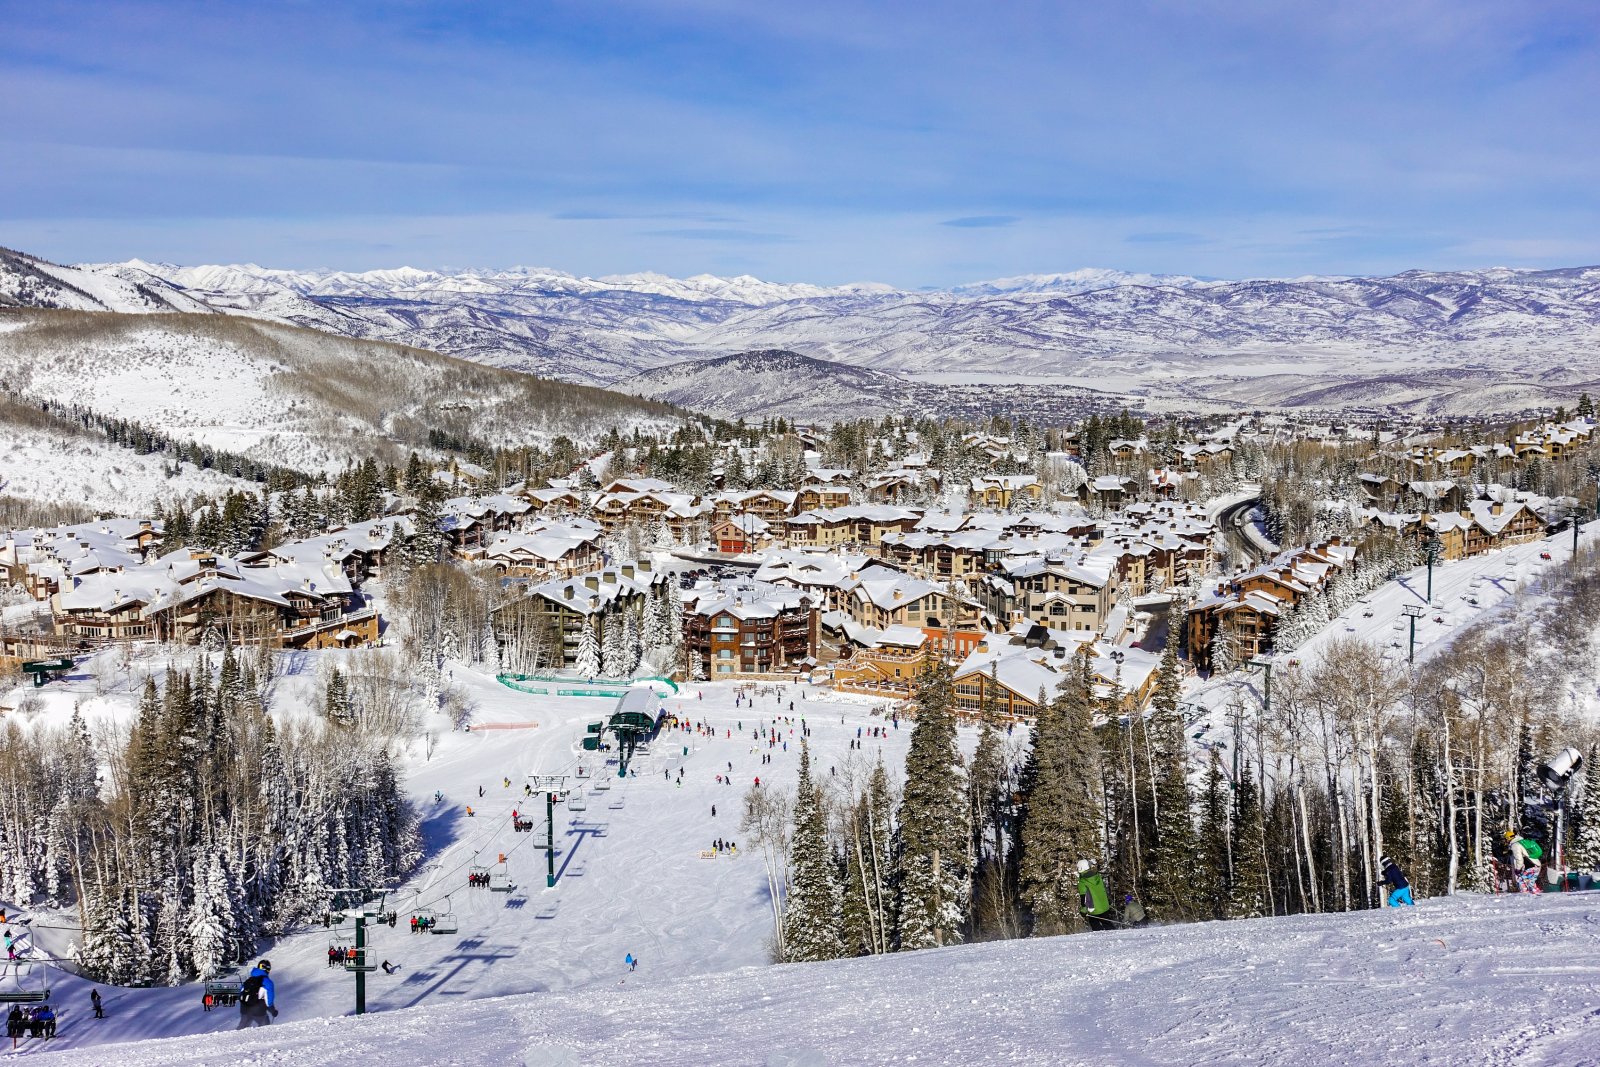 <p class="wp-caption-text">Image Credit: Shutterstock / David A Litman</p>  <p><span>Hit the slopes in style at Park City, with its world-class ski resorts and charming mountain village that exudes the ambiance of a European alpine town.</span></p>